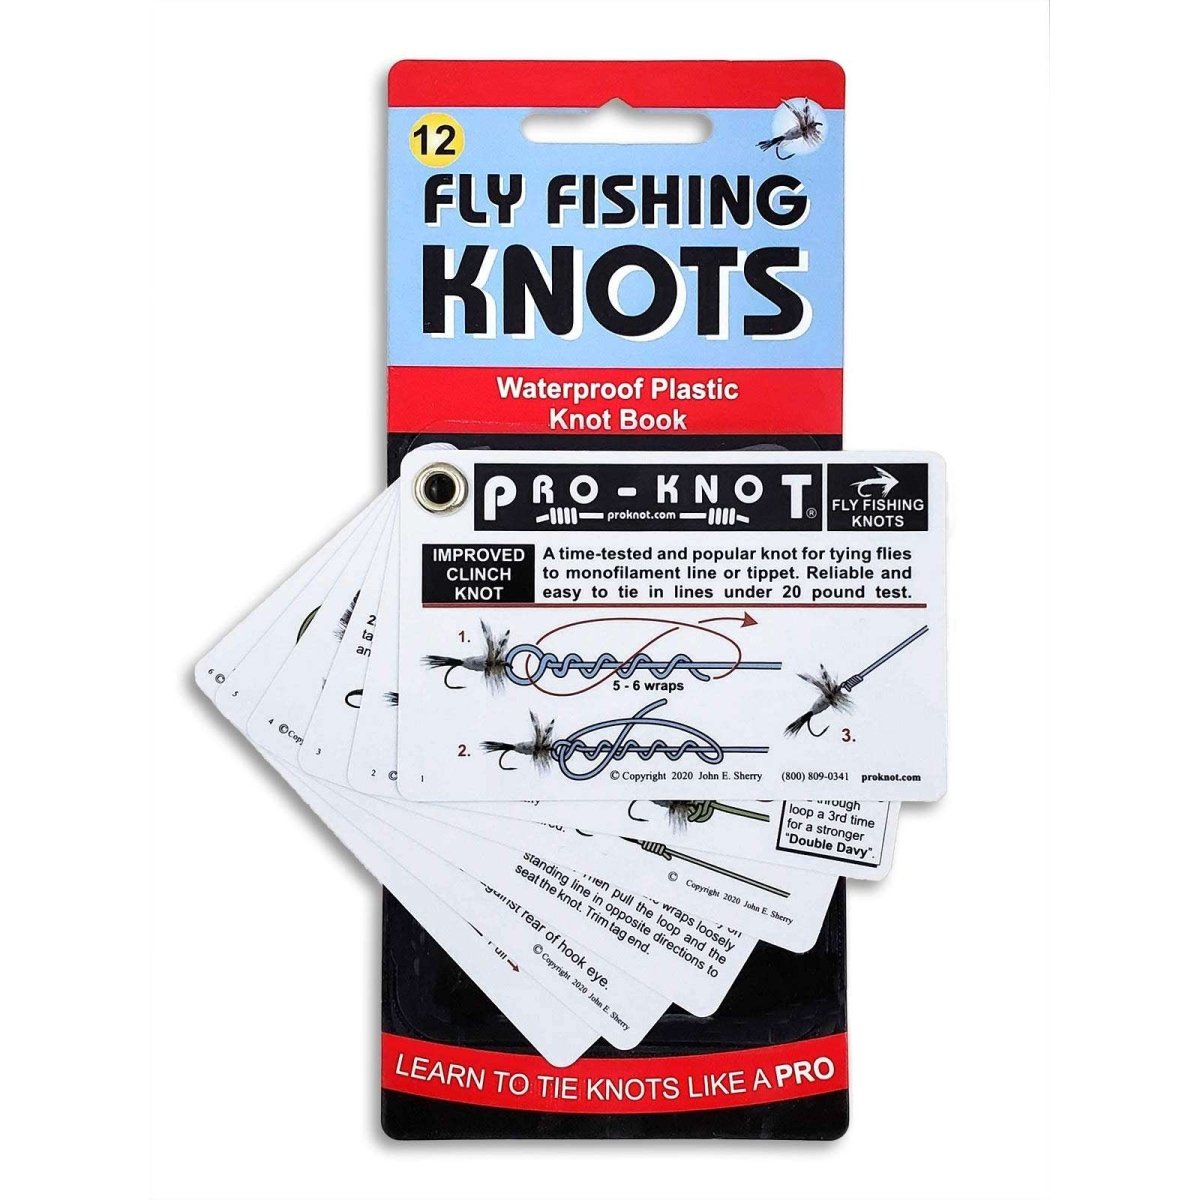 Fly Fishing Knots by Pro-Knot - Life Raft Professionals